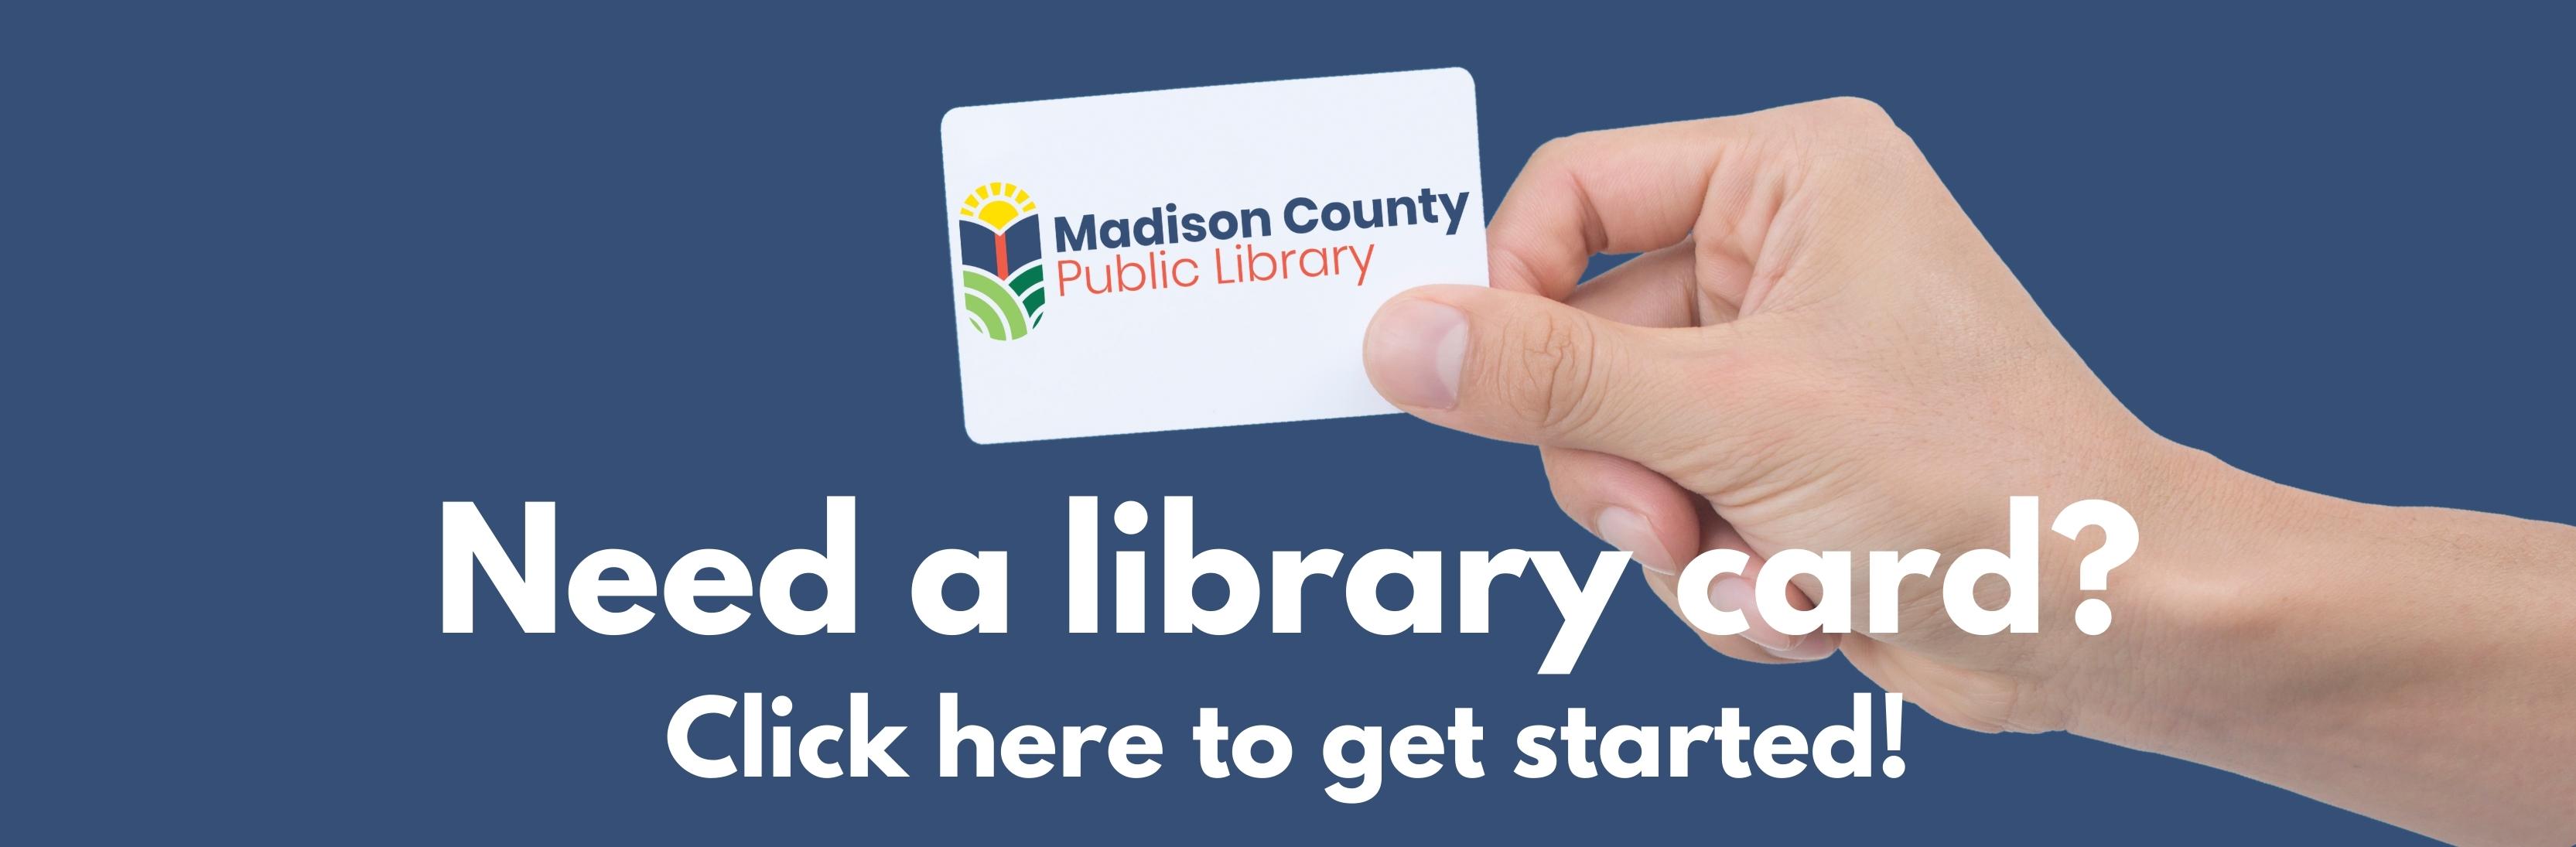 Image for "need a library card"